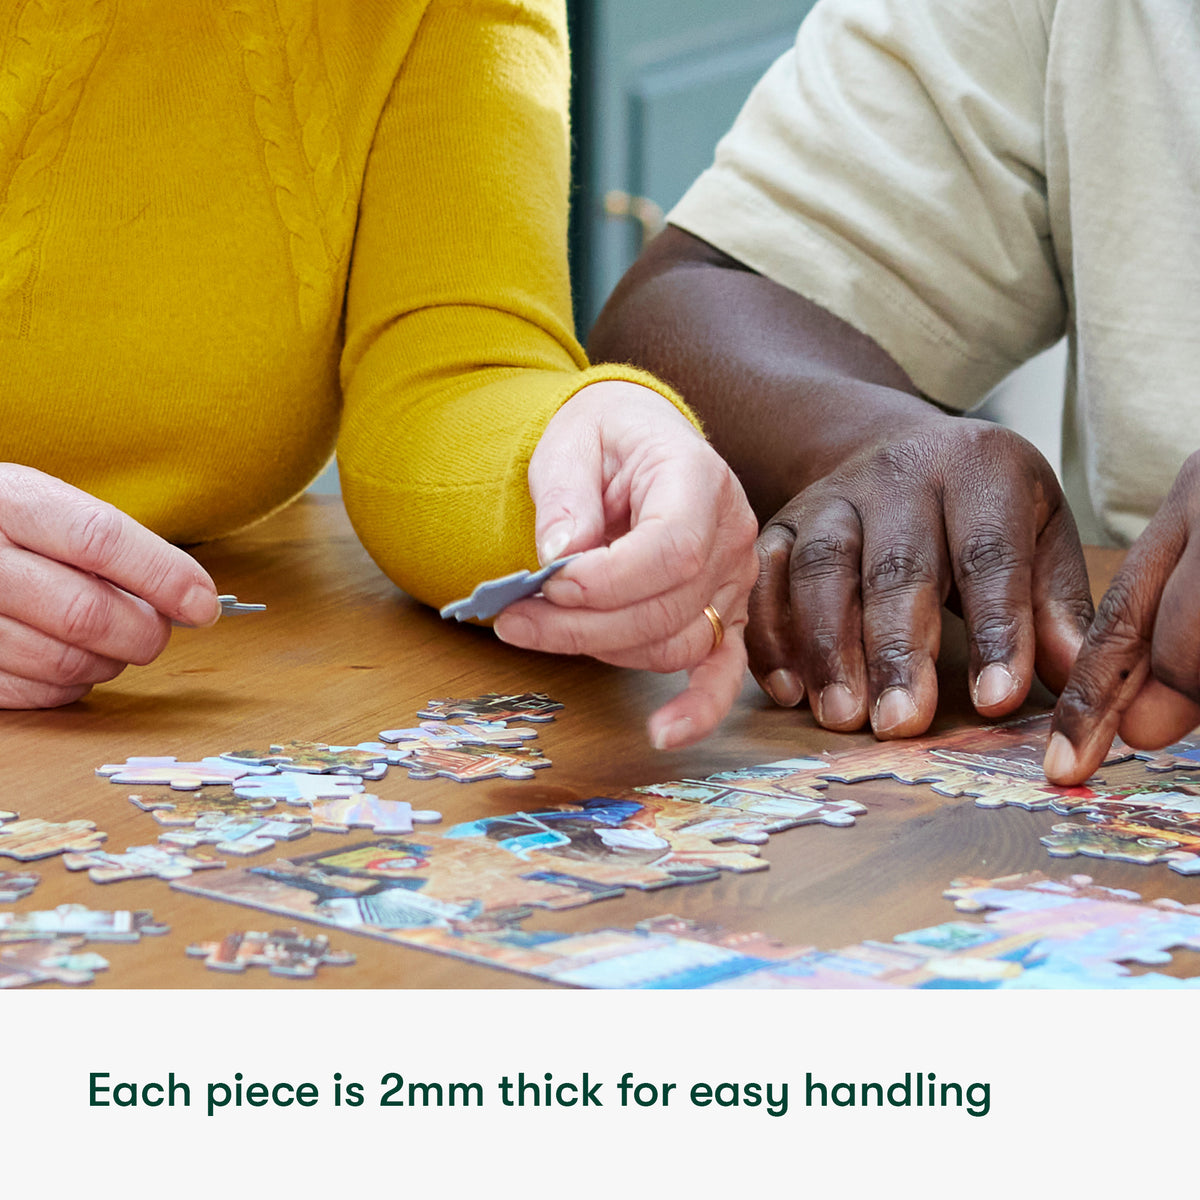 100 Piece Jigsaw Puzzle - Great Outdoors - VAT Free